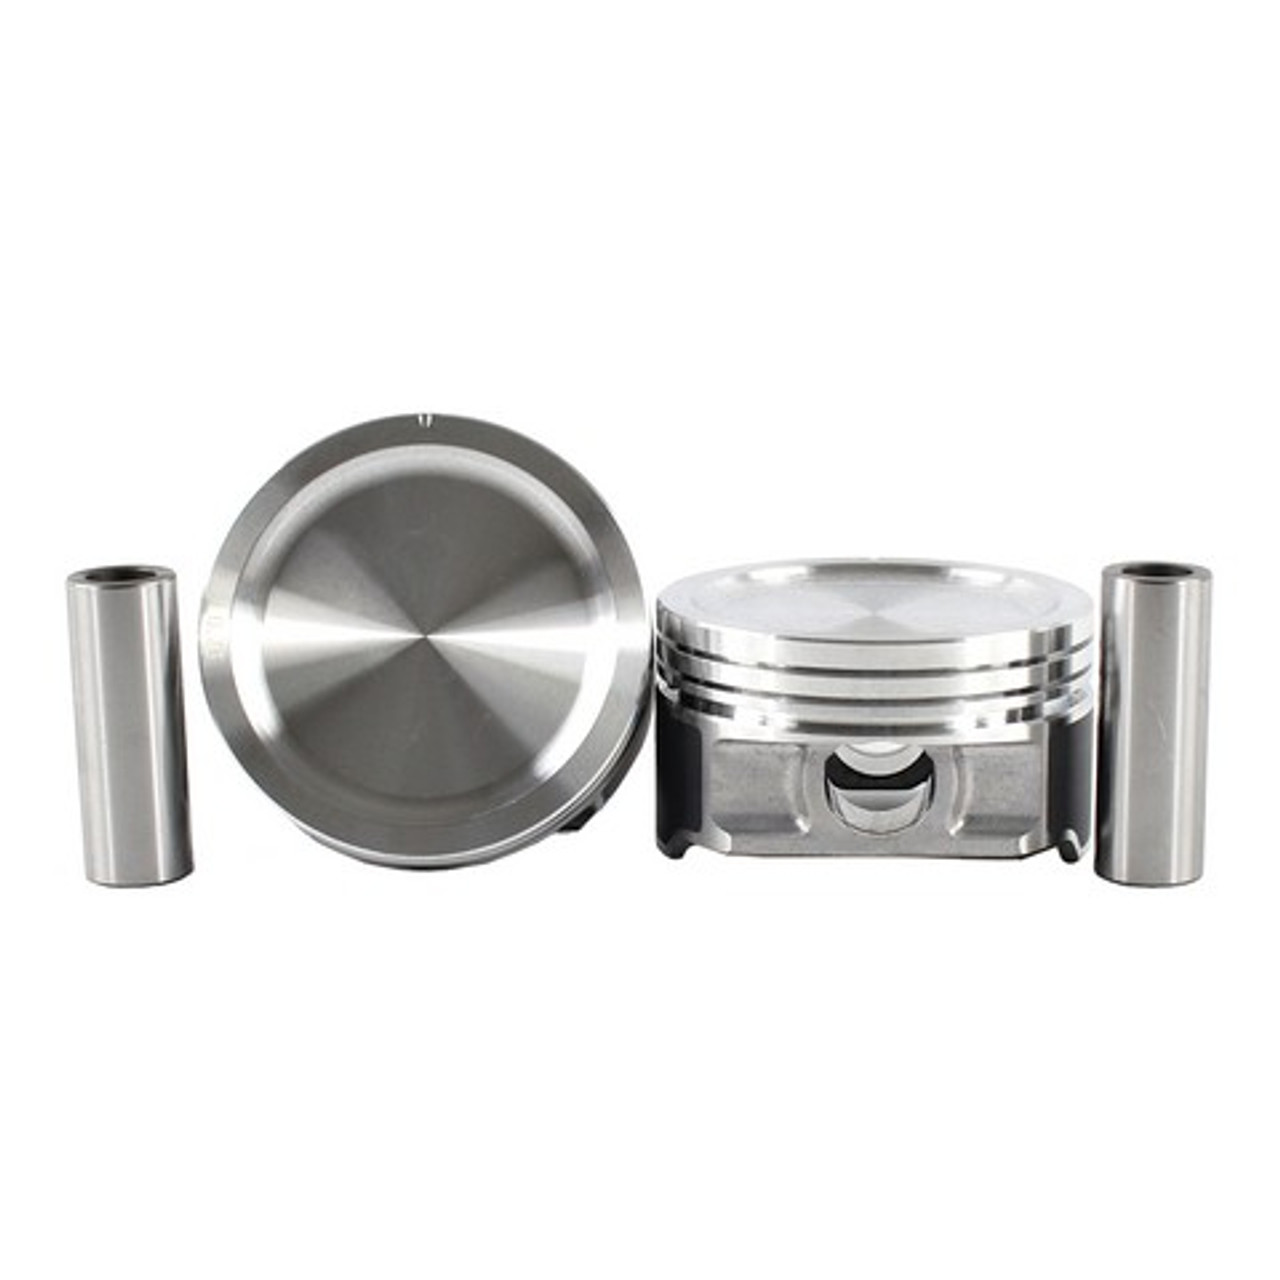 Piston Set 5.4L 2001 Ford Expedition - P4170.105